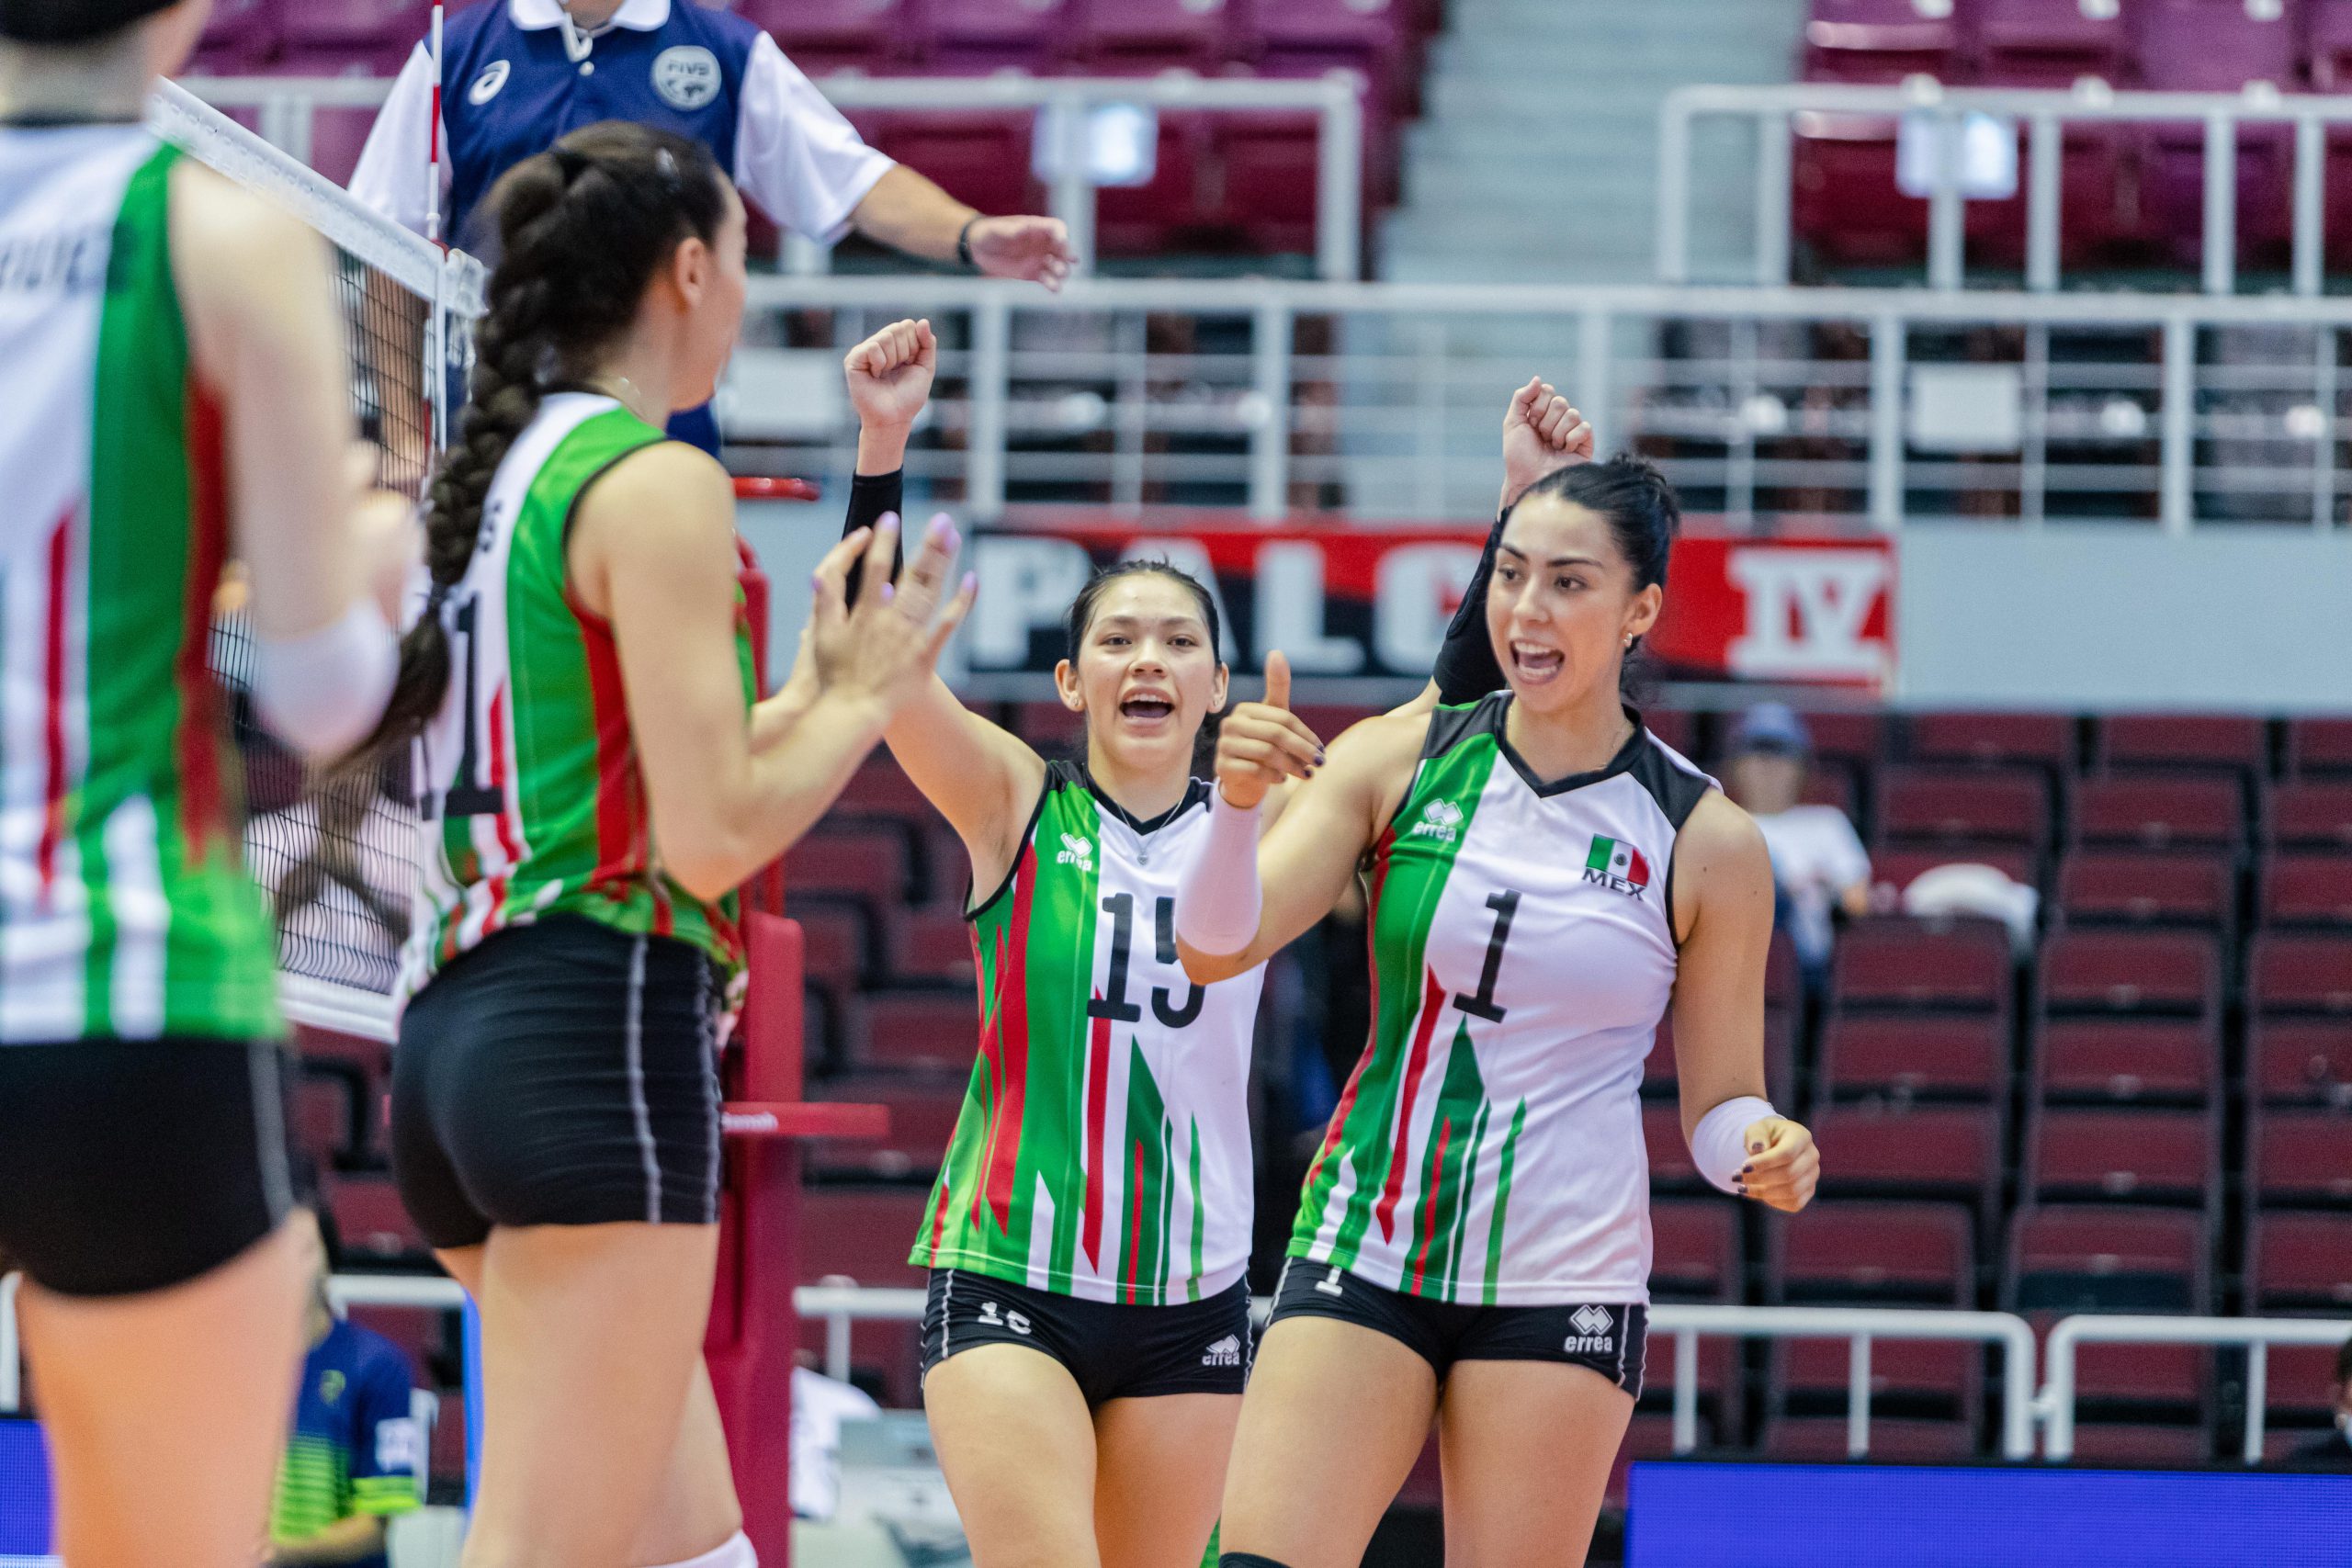 Mexico advanced and will play for the classification of positions from 5 to 8 